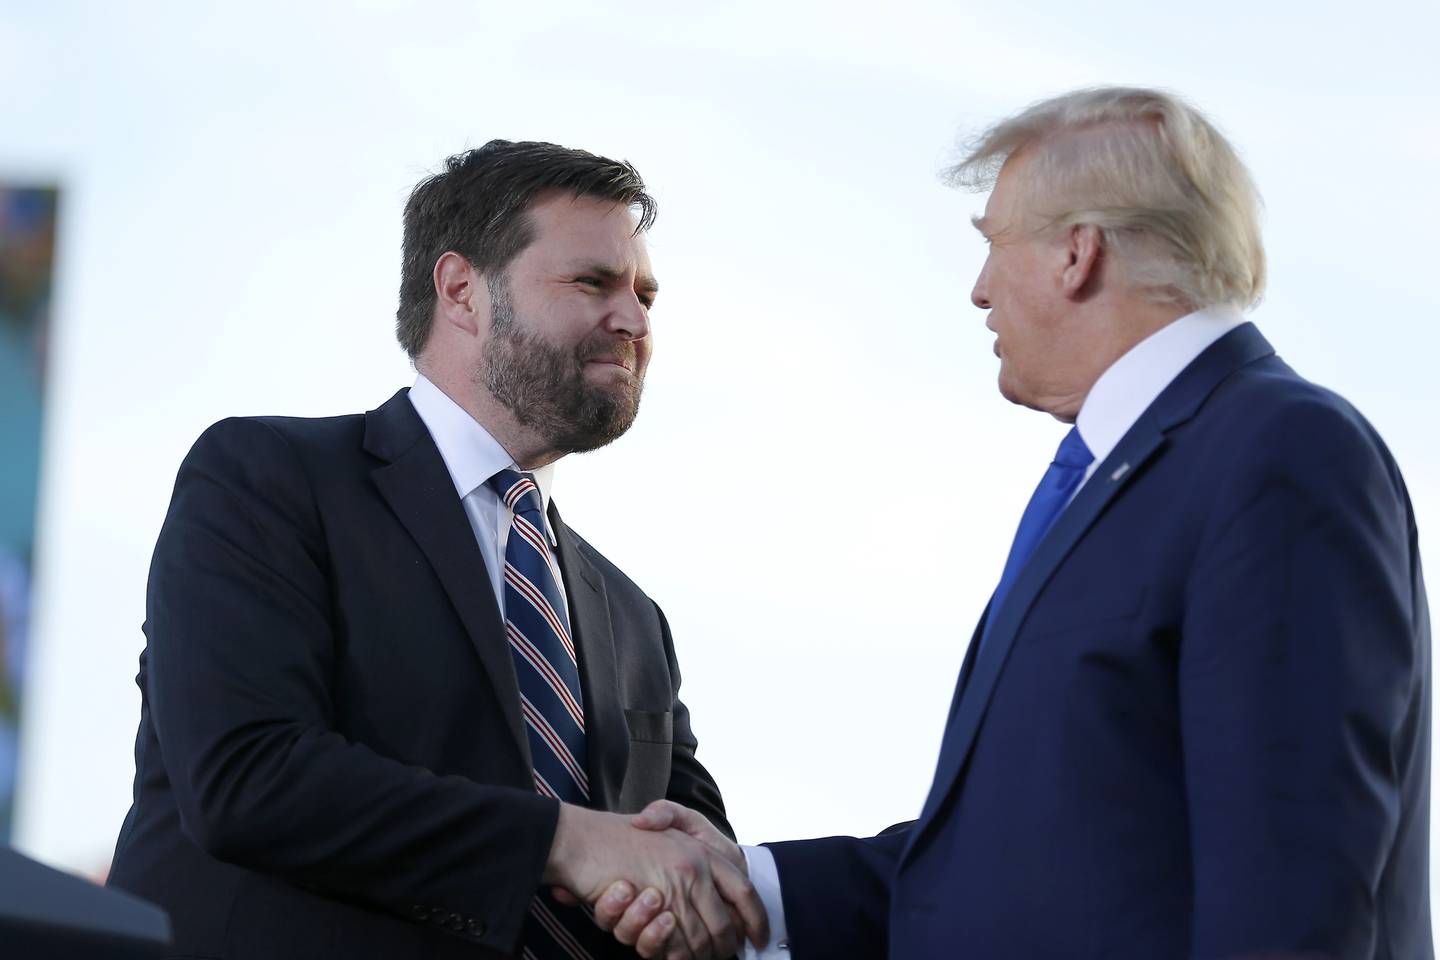 JD Vance greets former president Donald Trump at a rally at the Delaware County Fairgrounds in Delaware, Ohio. AP